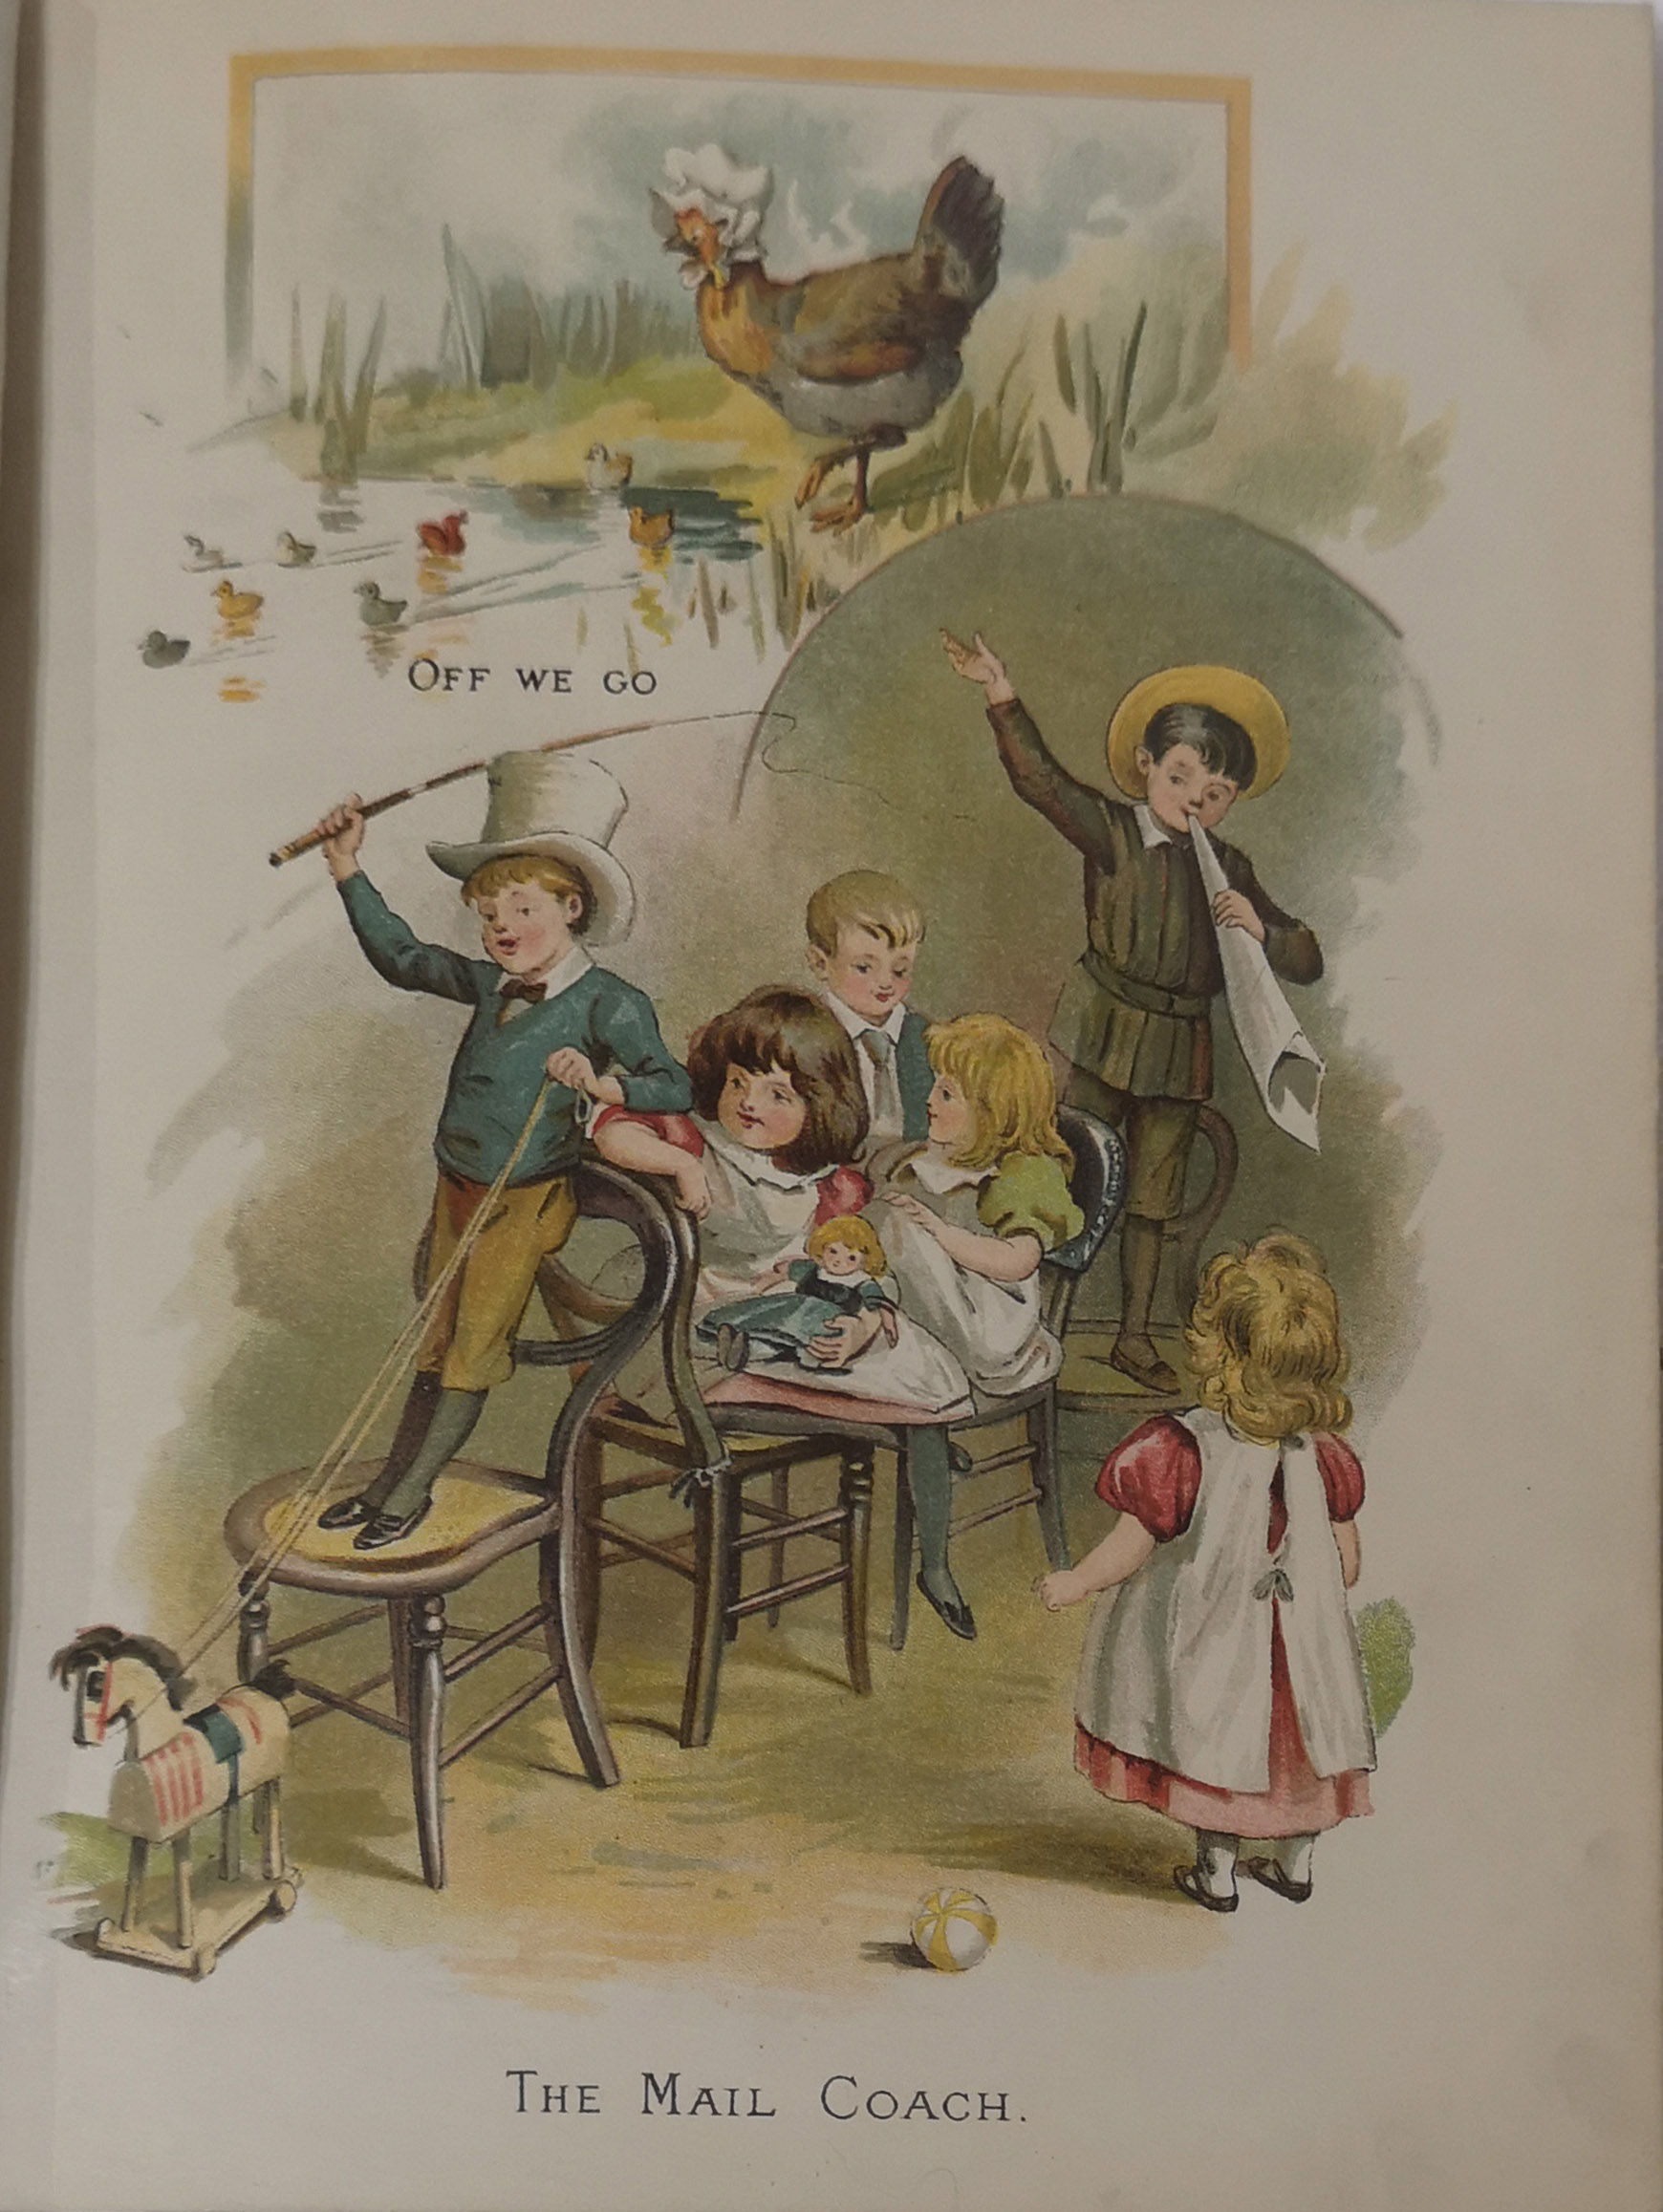 TINY TOTS LINEN PICTURE BOOK London, Frederick Warn & Co., N.D., CA 1900, glazed paper pictorial - Image 3 of 3